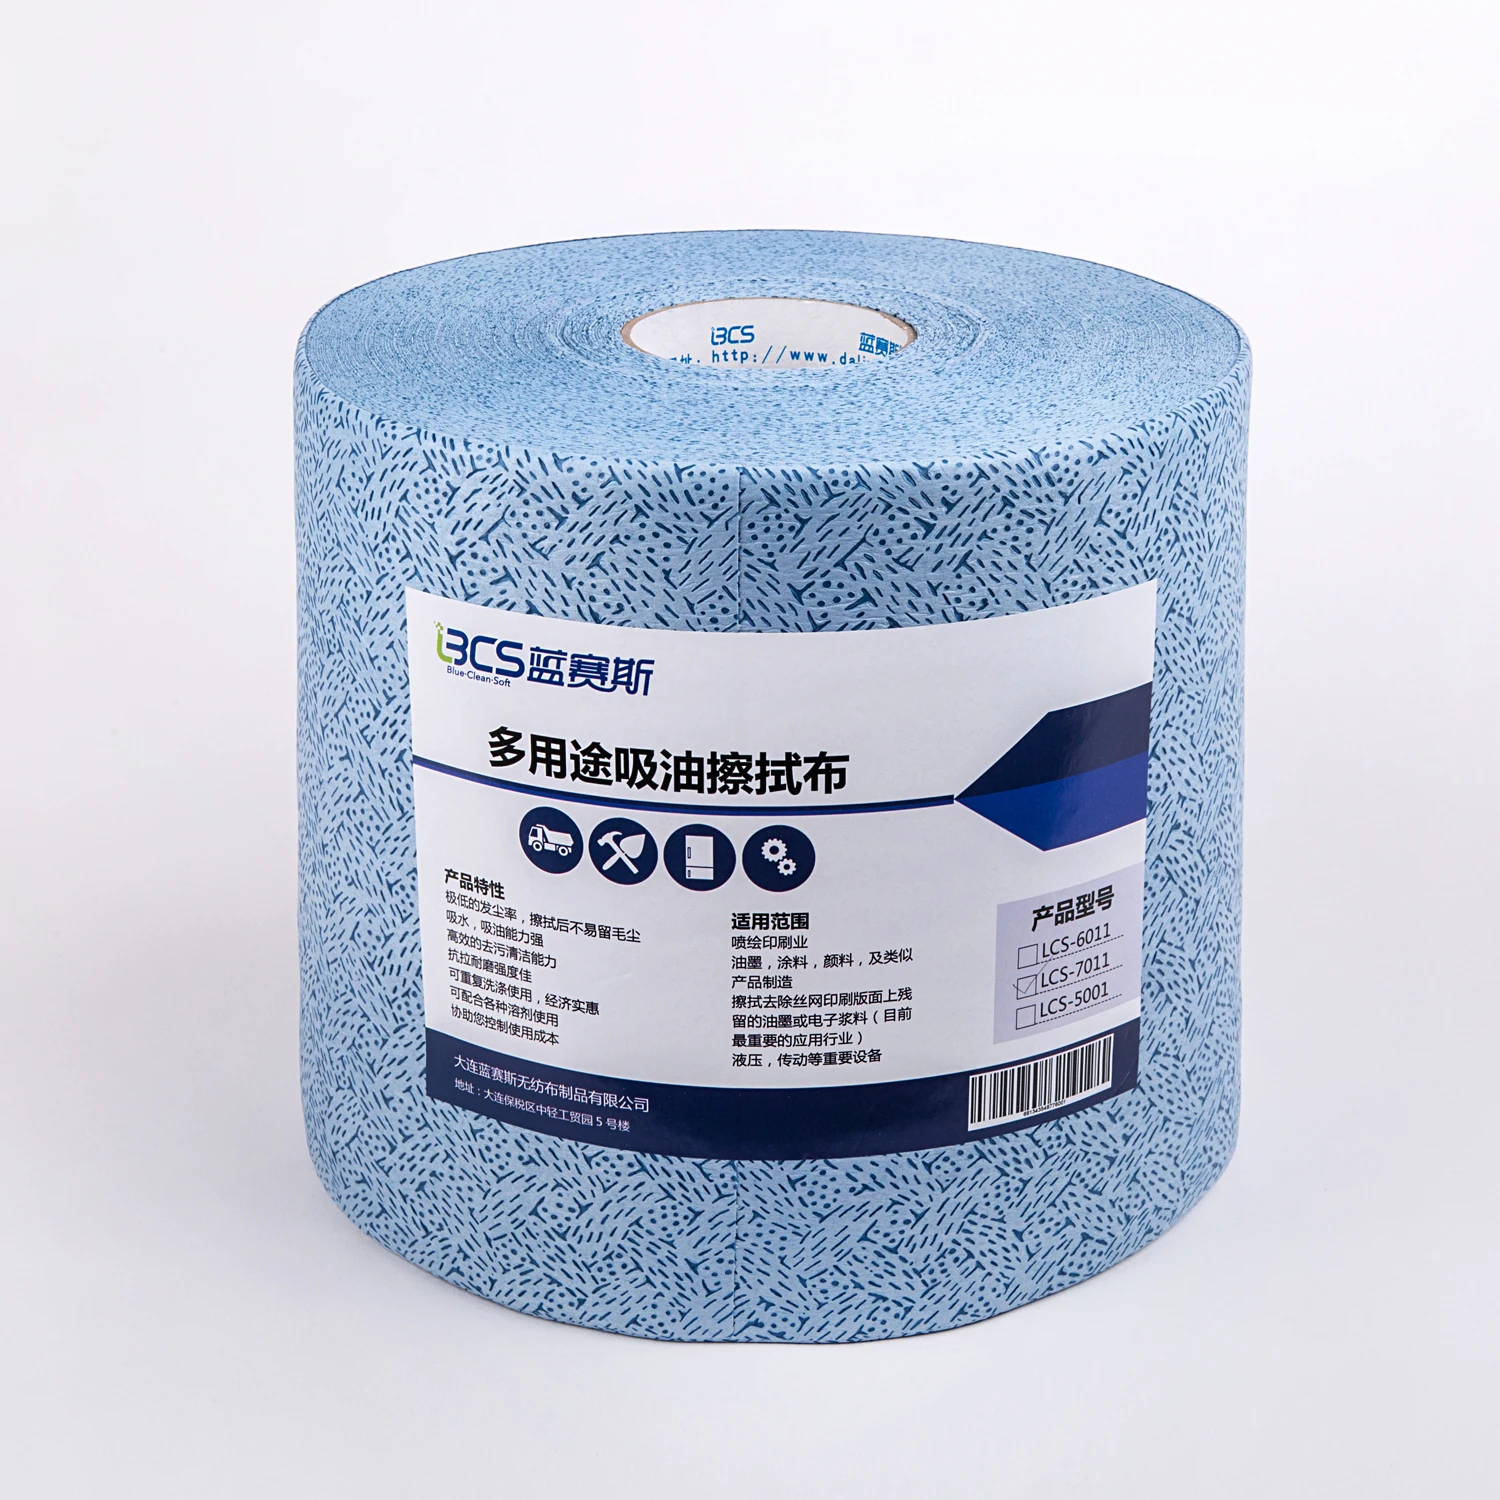 

BCS PP Nonwoven Industrial Melt-Blown Oil Absorbent Wipe Grease Cleaning, Blue